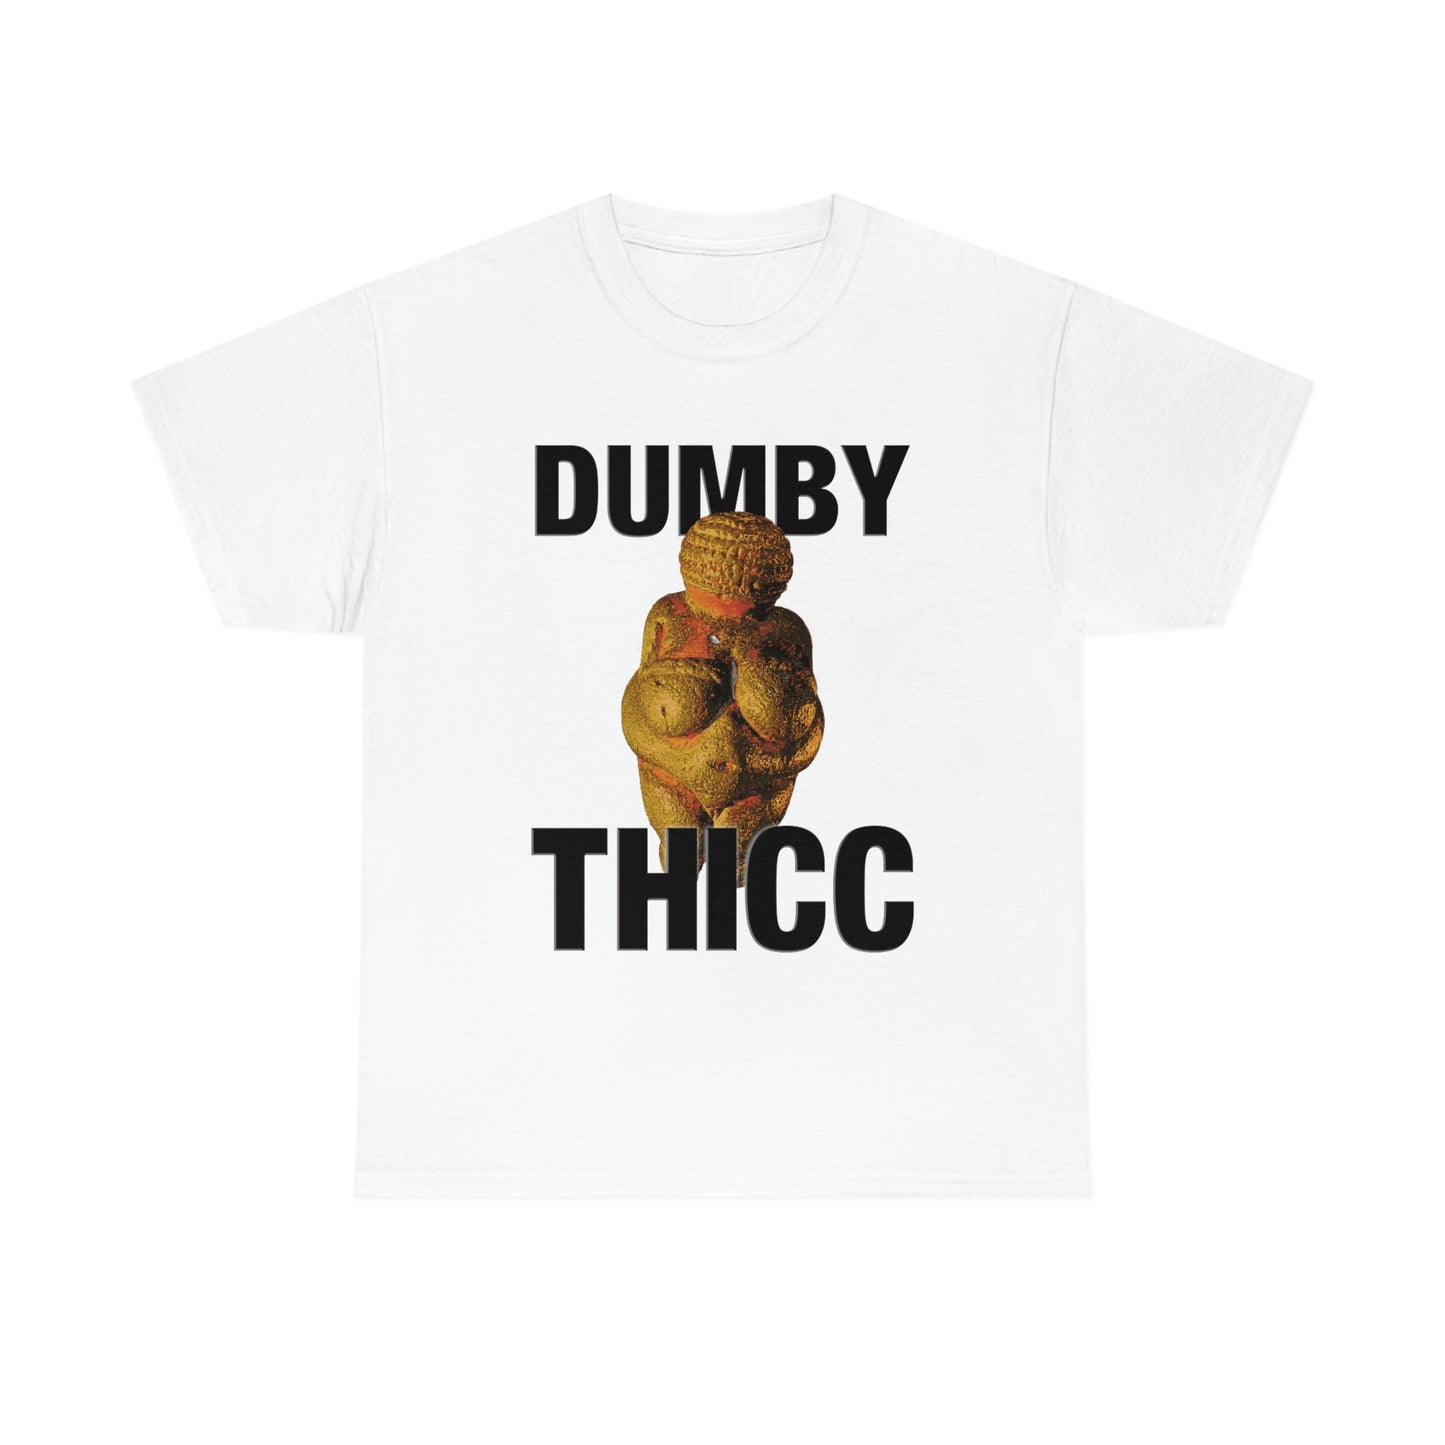 Dumby Thicc.